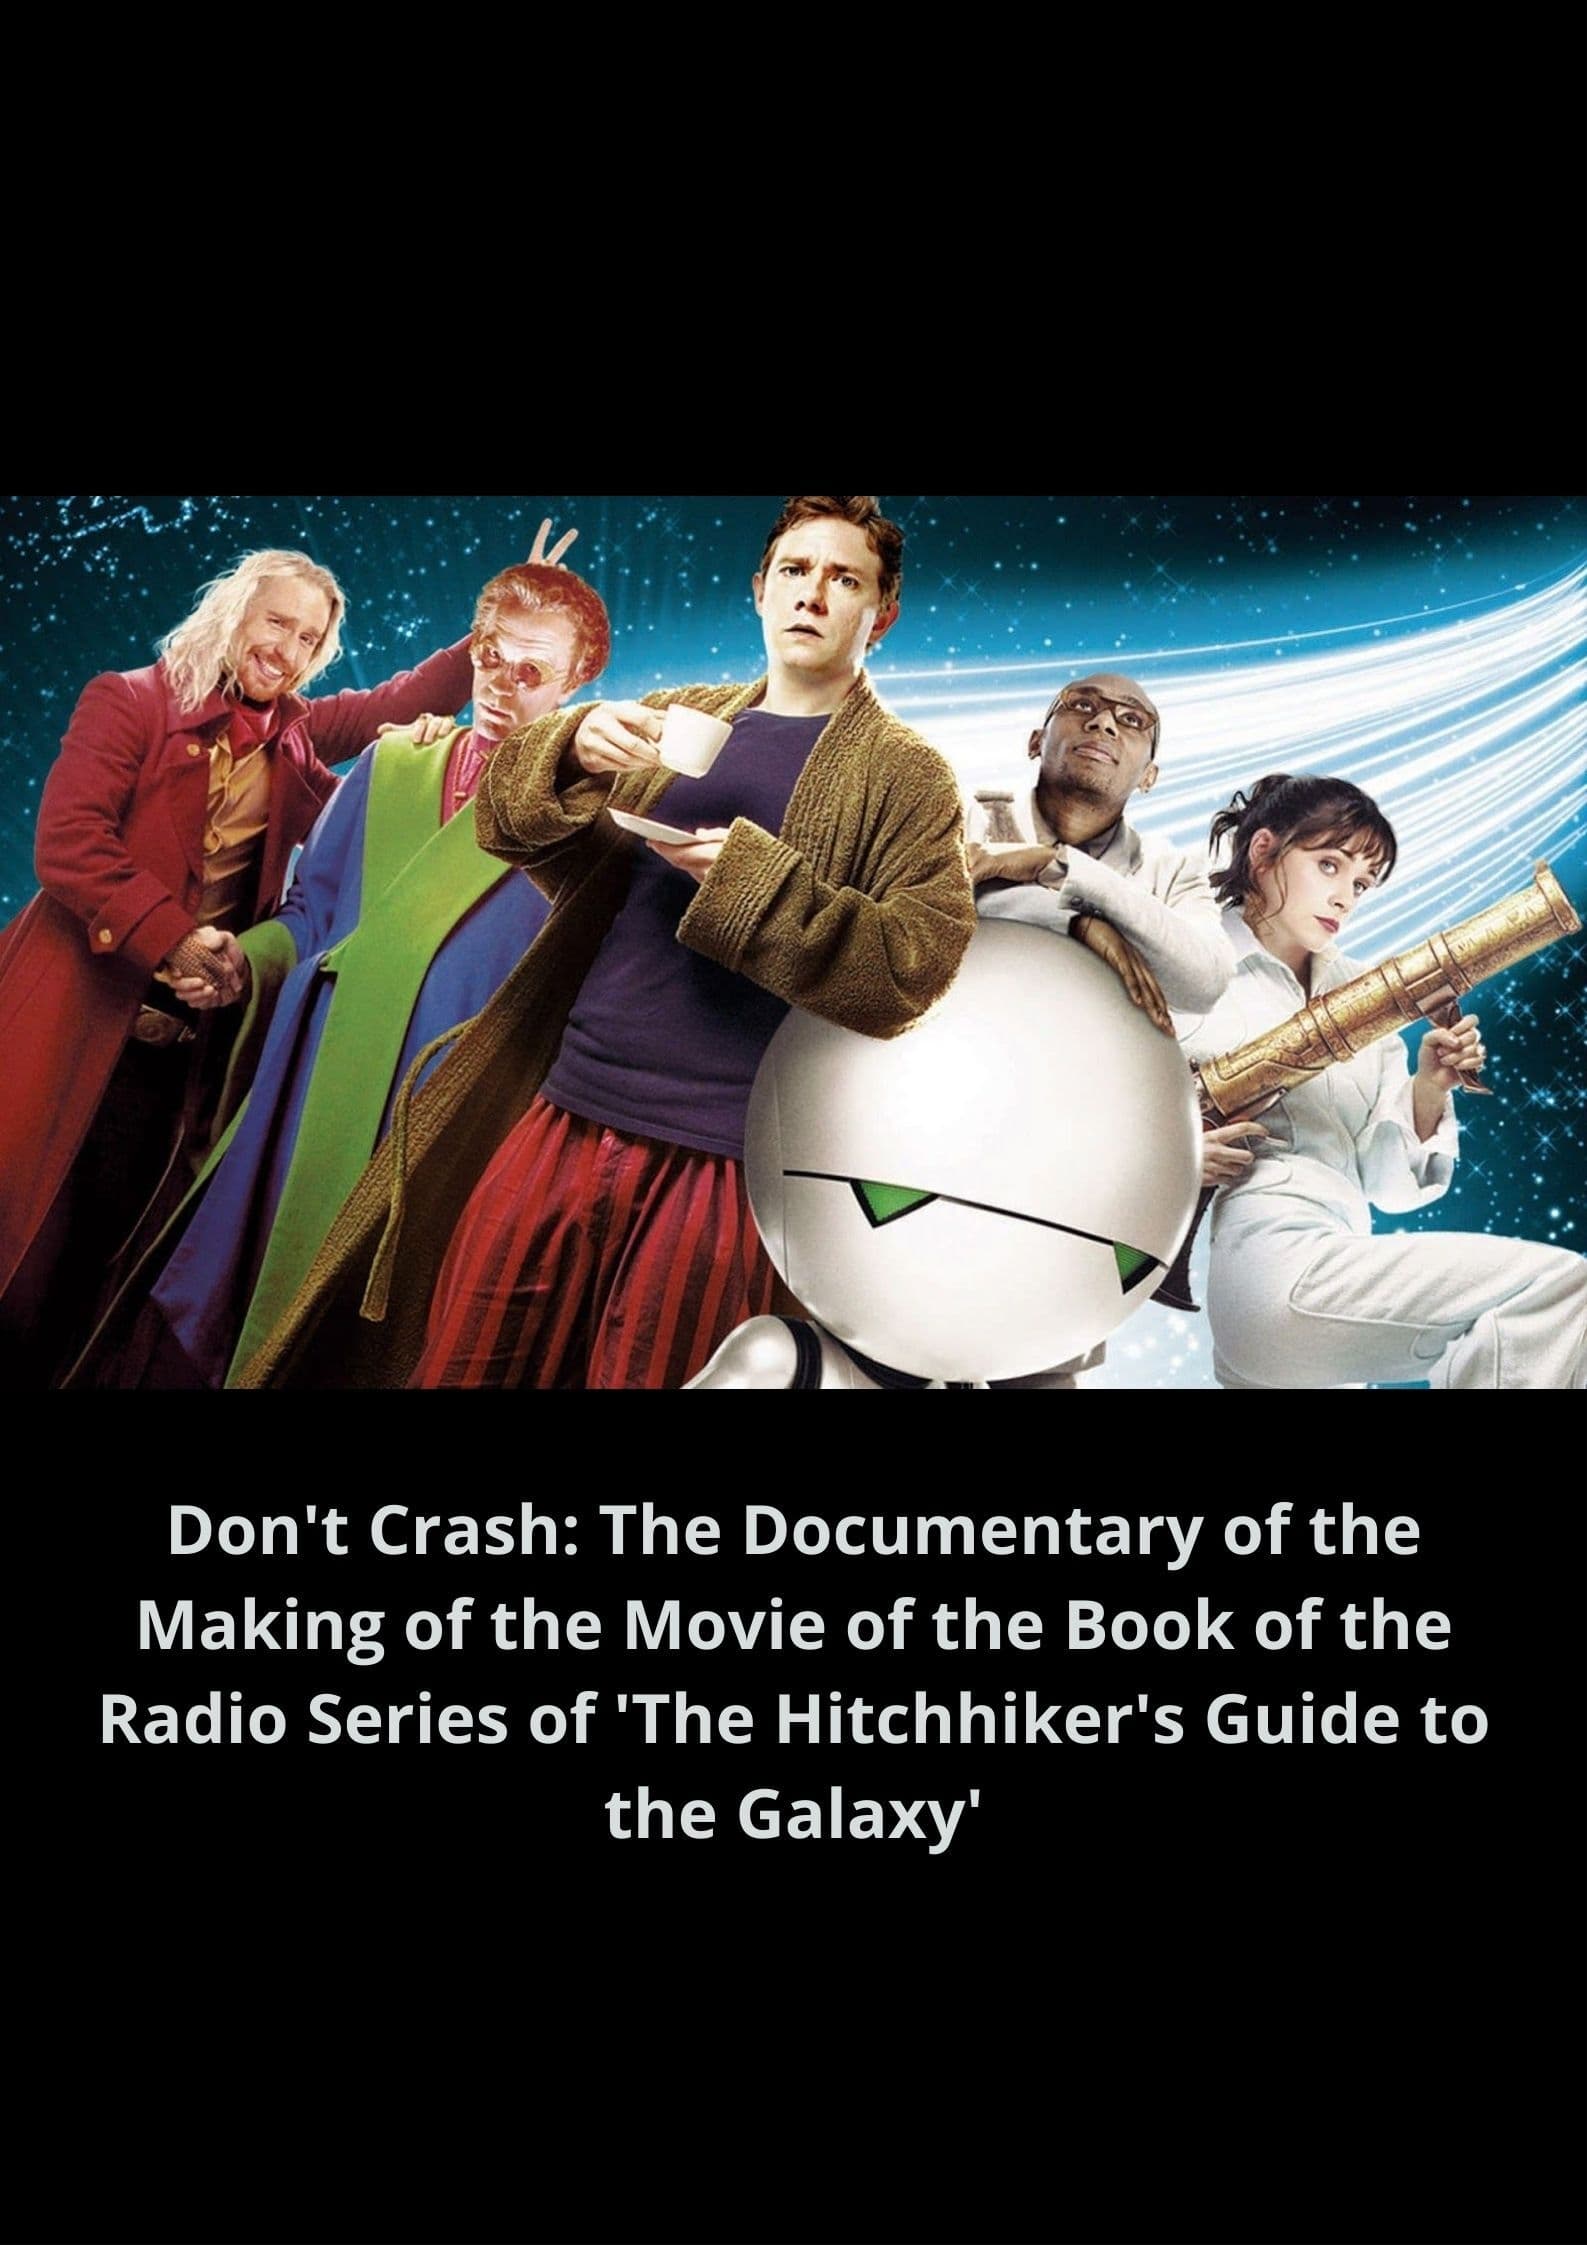 Don't Crash: The Documentary of the Making of the Movie of the Book of the Radio Series of 'The Hitchhiker's Guide to the Galaxy' (2005)